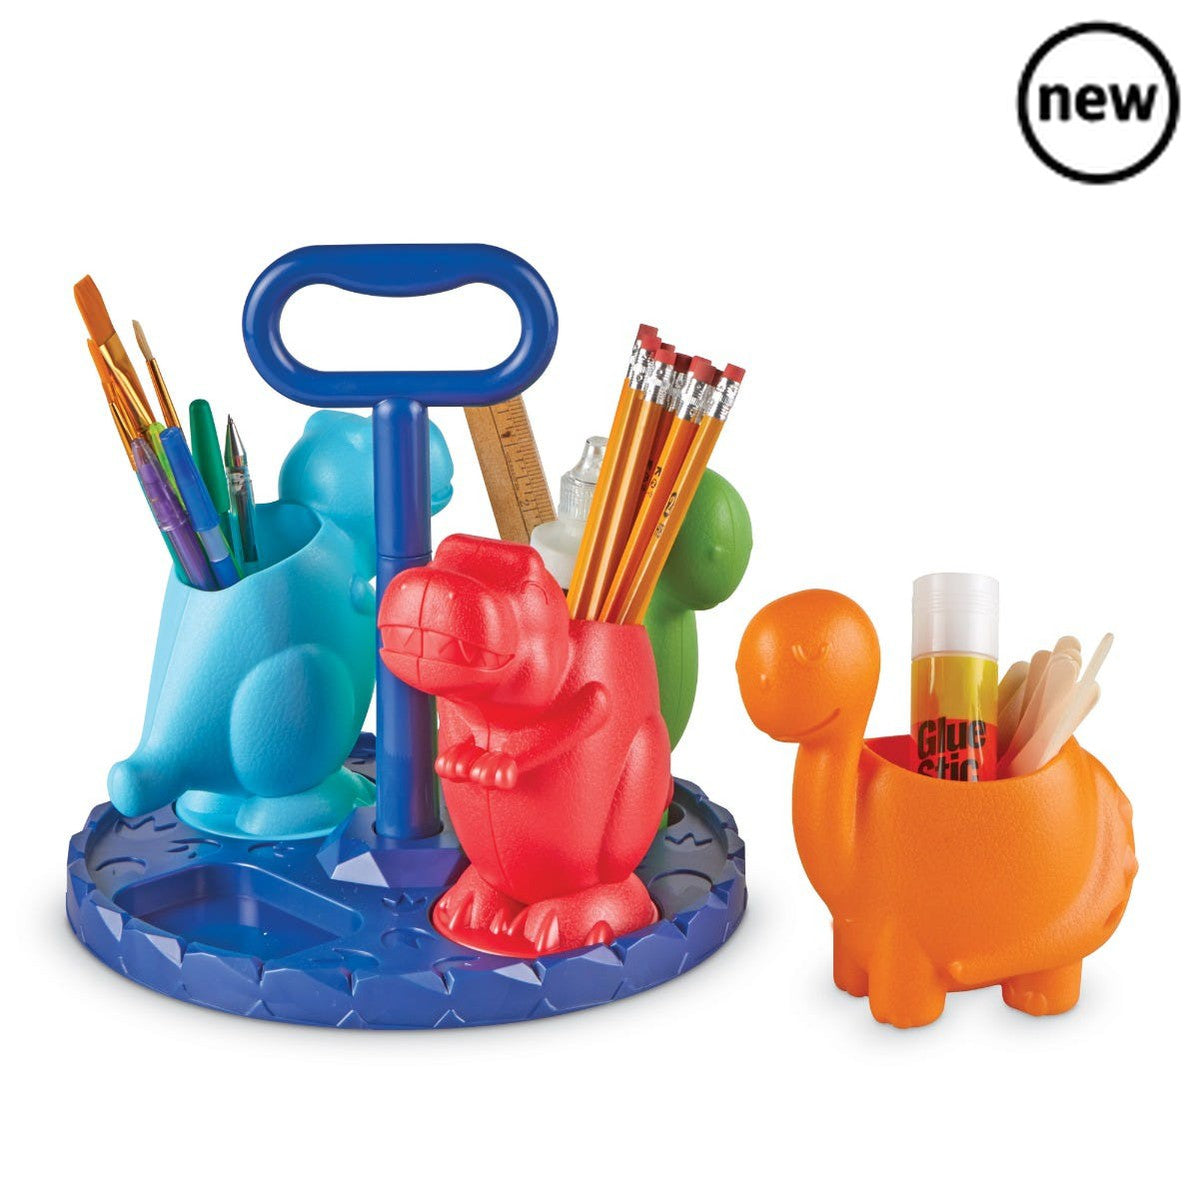 Create-a-Space Kiddy Centre Dinos, Create-a-Space™ Kiddy Centre: Dinos! is the dinosaur storage solution that’s perfect for dino fans to organise pencils, markers, scissors, glue stick, and more. There are 4 removable dinosaur stationery storage cups on the portable base with carrier handle. This means that stationery supplies are always within easy reach. Dinosaur fans will love organising their stationery with this fun Create-a-Space™ desk organiser. Store stationery supplies and move them with ease. This